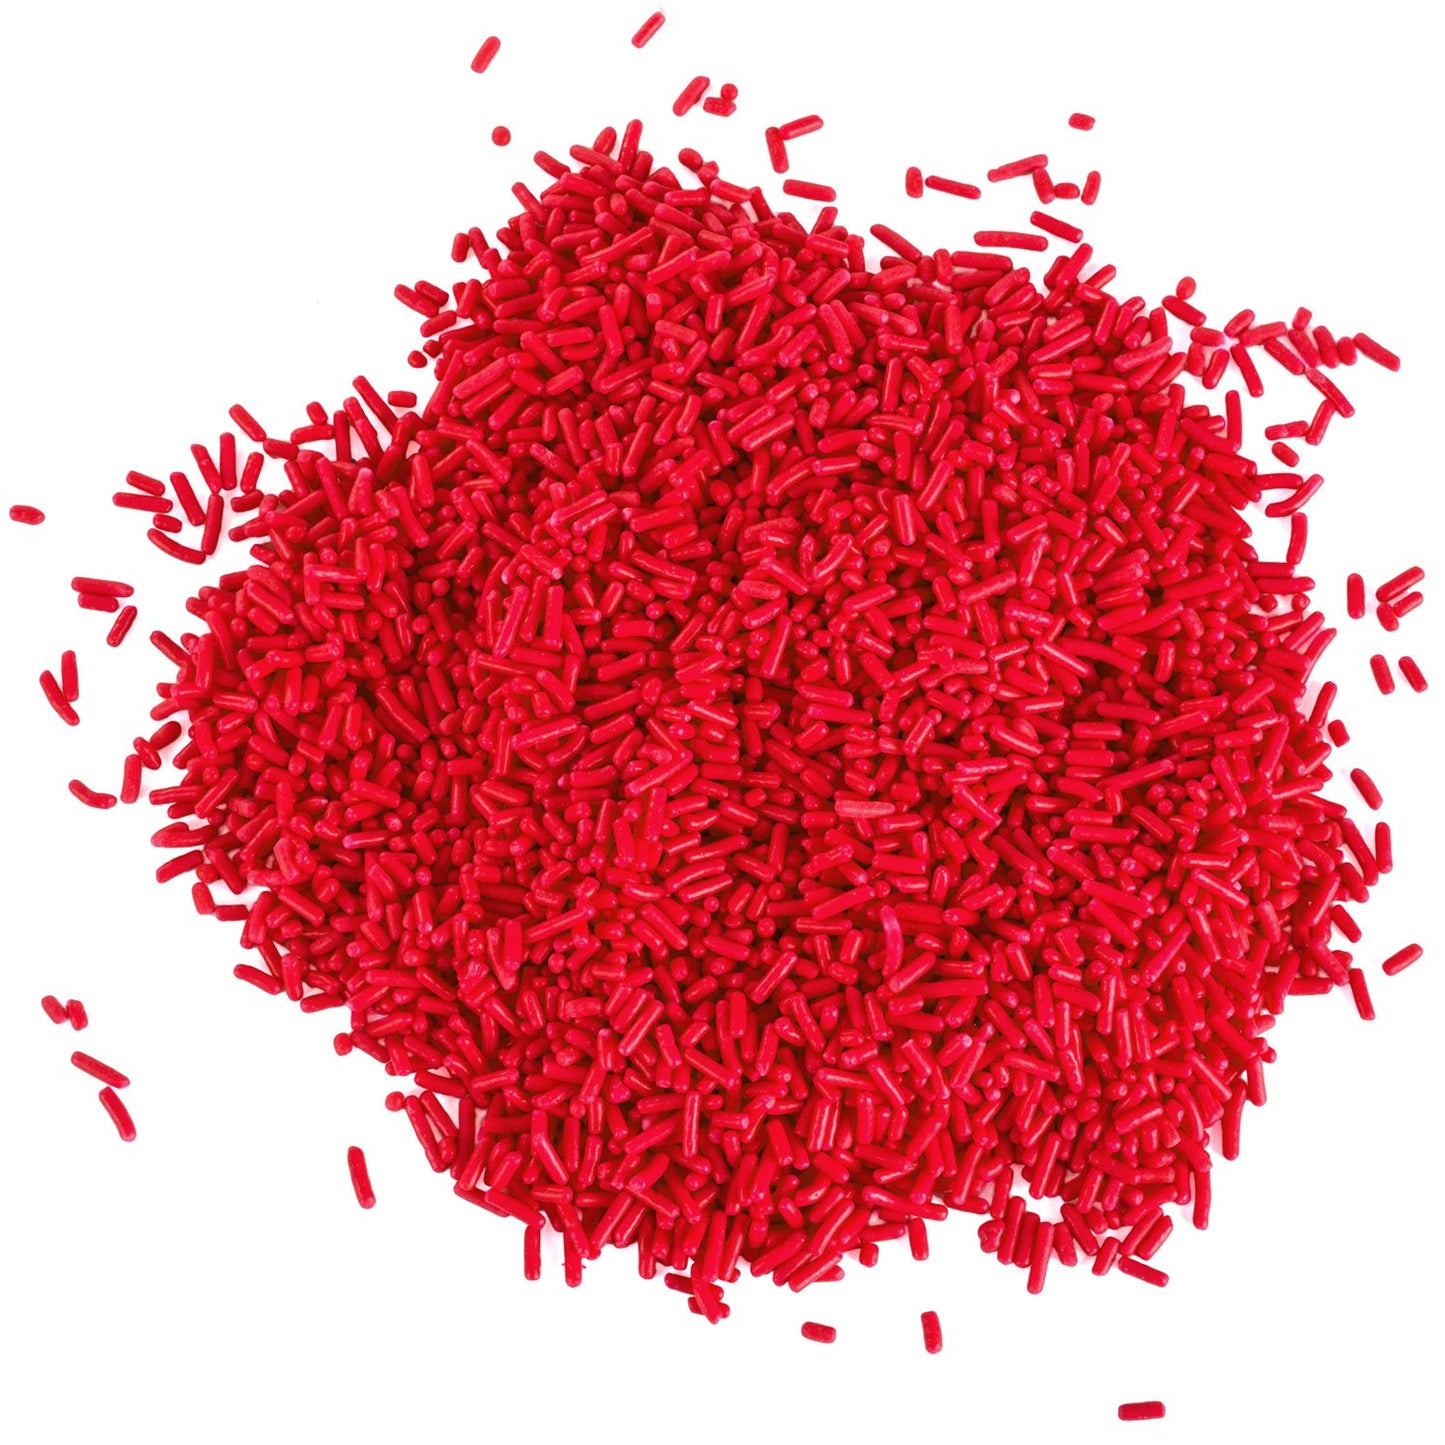 Red Sprinkles - Red Jimmies for Cookie Decorating - Red Sprinkles Bulk in Resealable Container - Red Sprinkles Jimmies - Bulk Candy - 1.6 Pounds